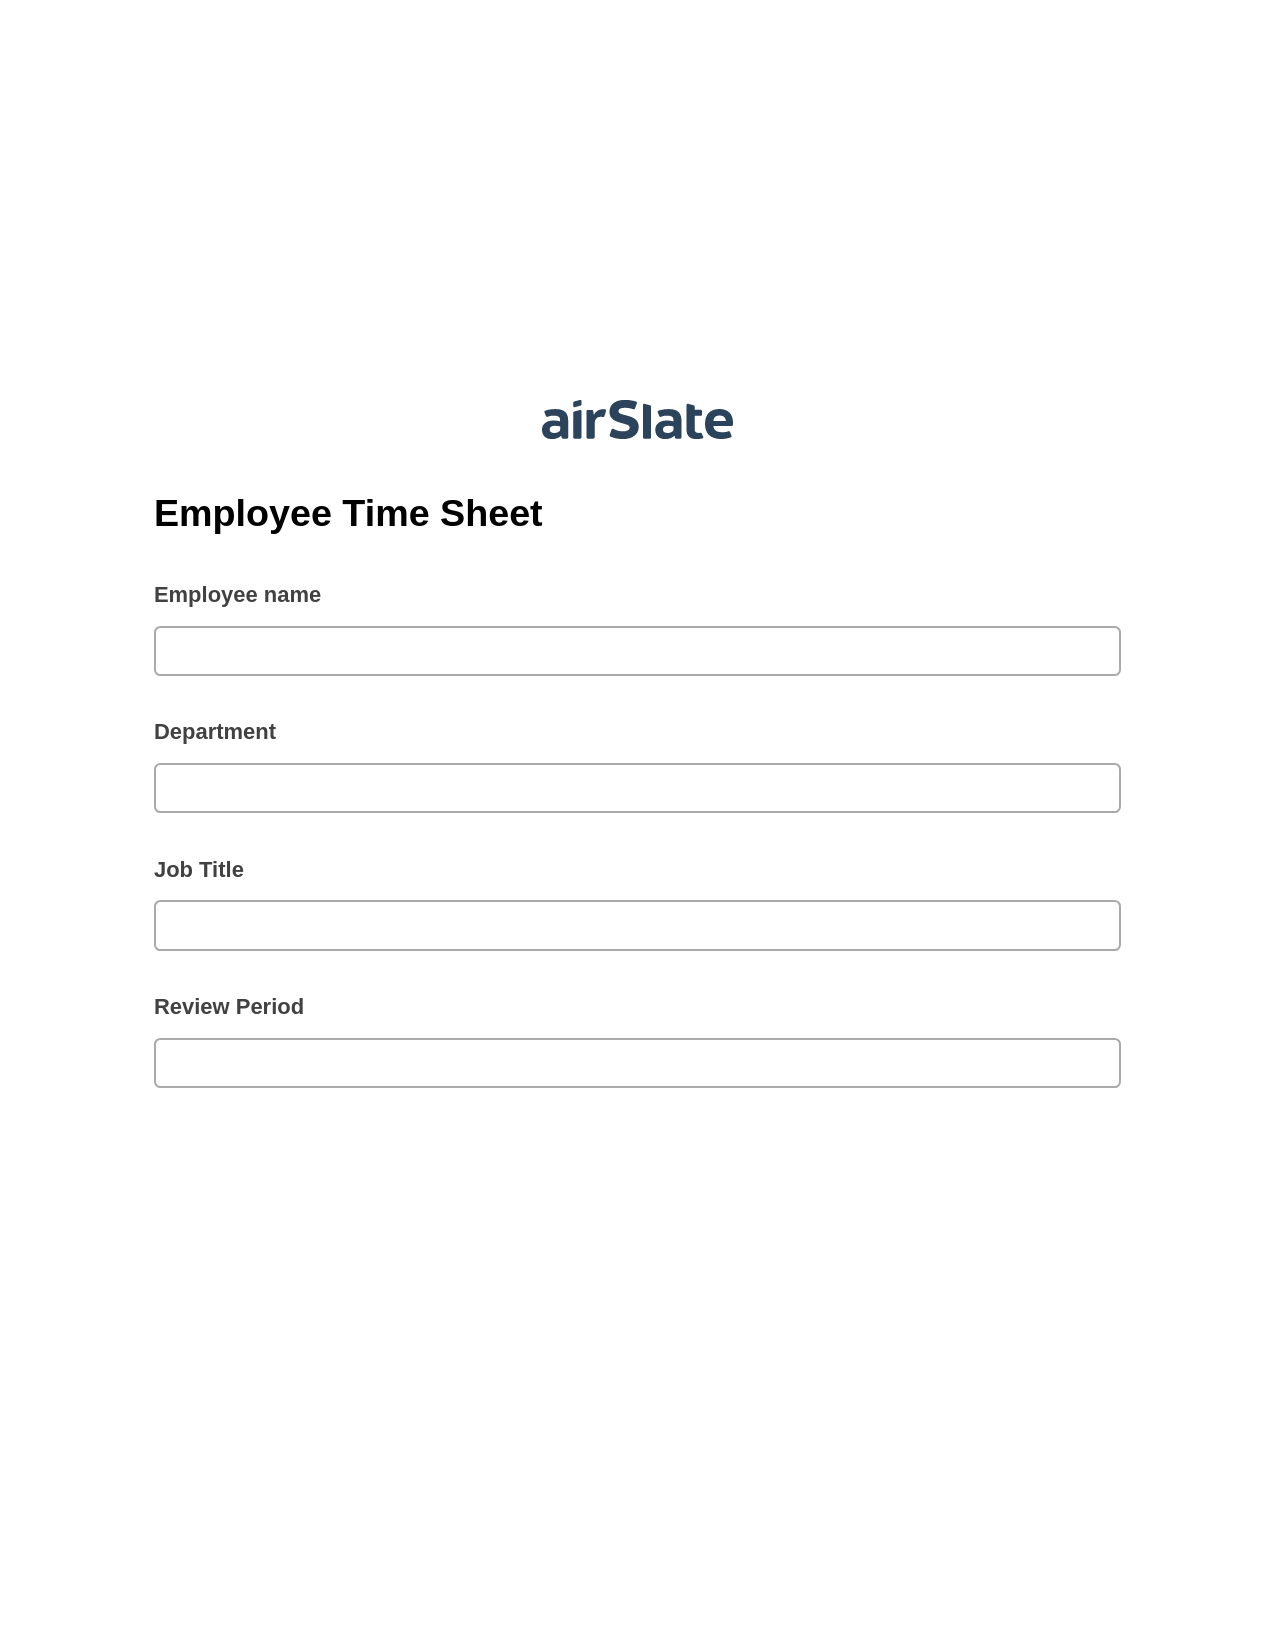 Multirole Employee Time Sheet Pre-fill from Excel Spreadsheet Bot, Create slate addon, Archive to Dropbox Bot